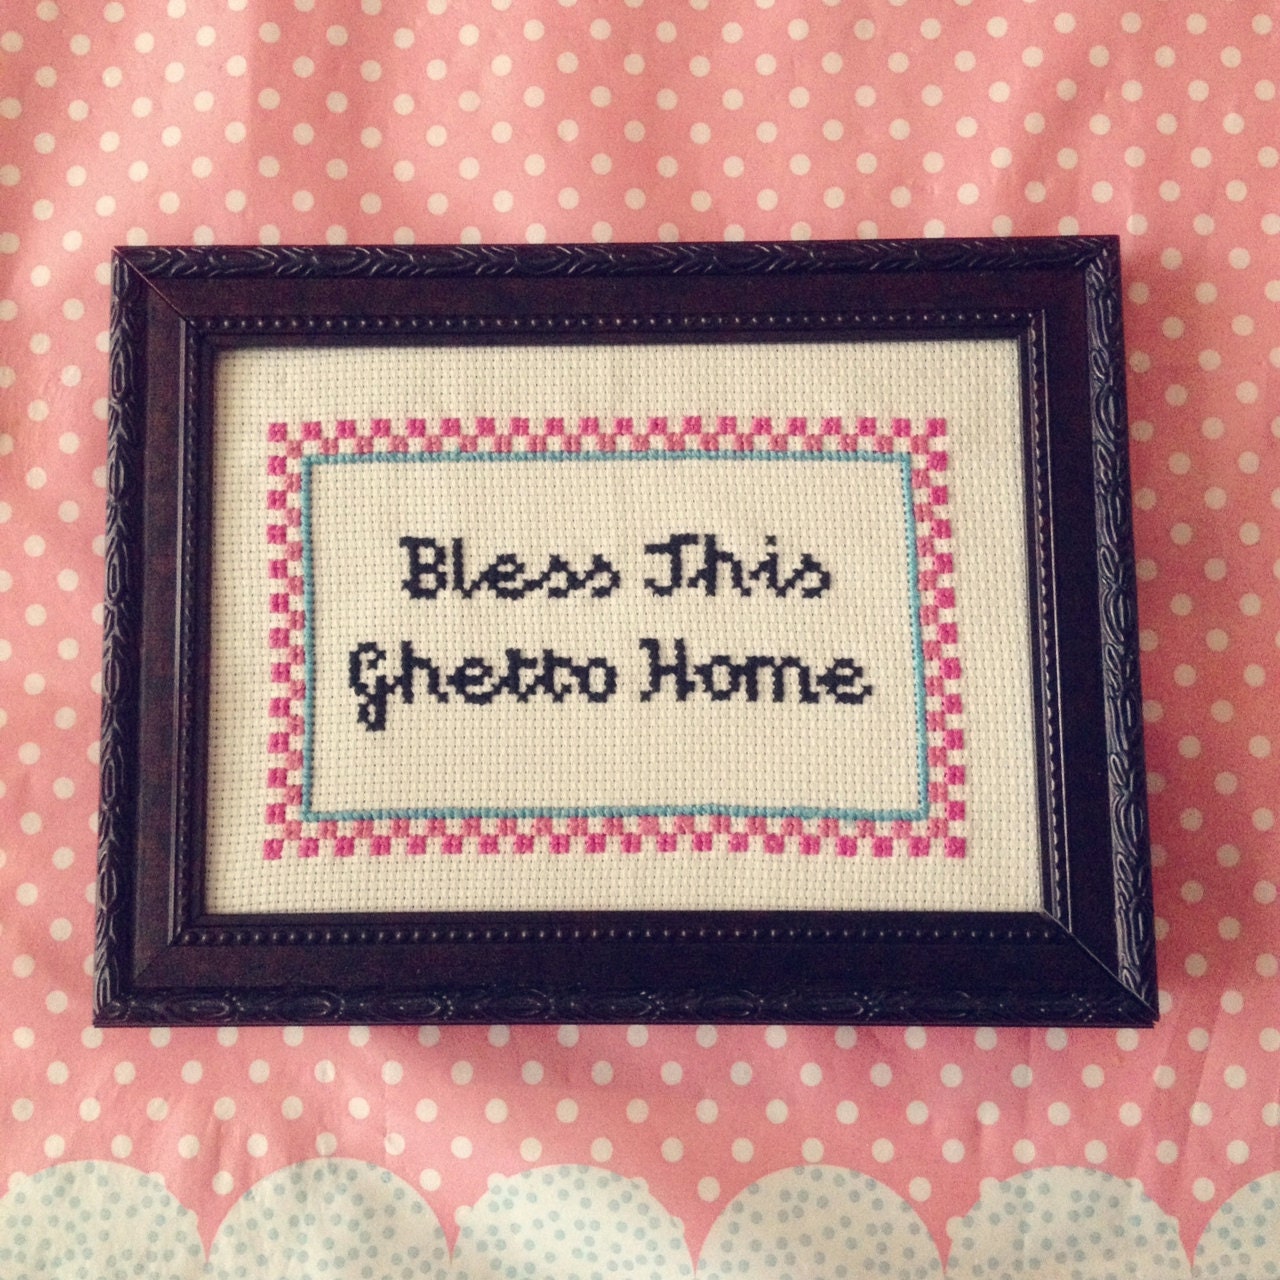 MADE TO ORDER- Bless this ghetto home - Finished and framed cross stitch